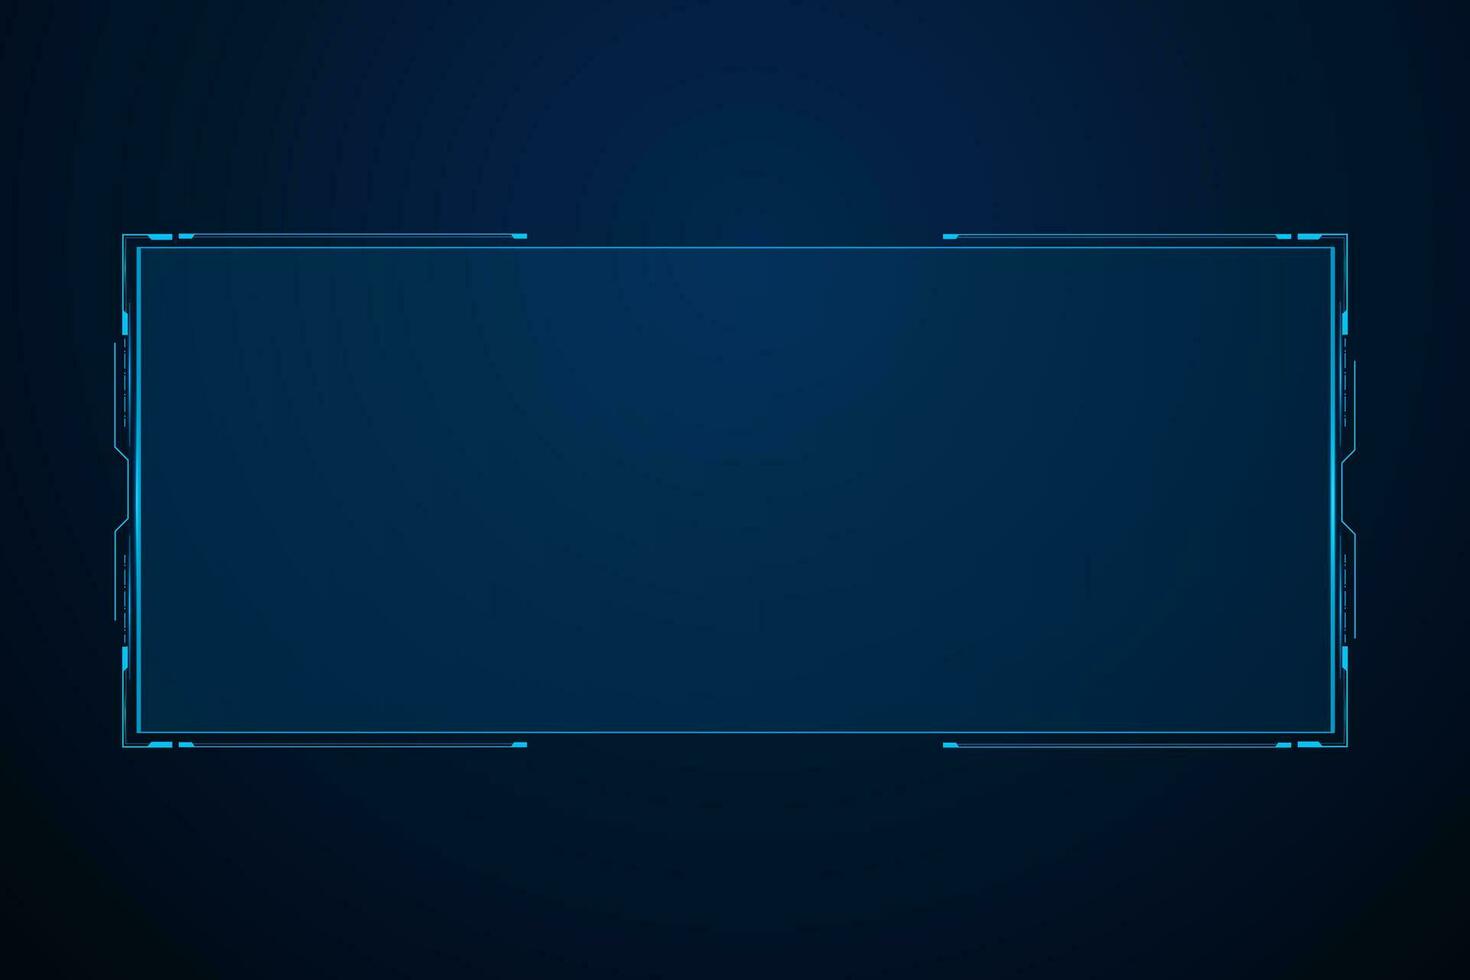 Sci fi futuristic user interface, HUD template frame design, Technology abstract background vector